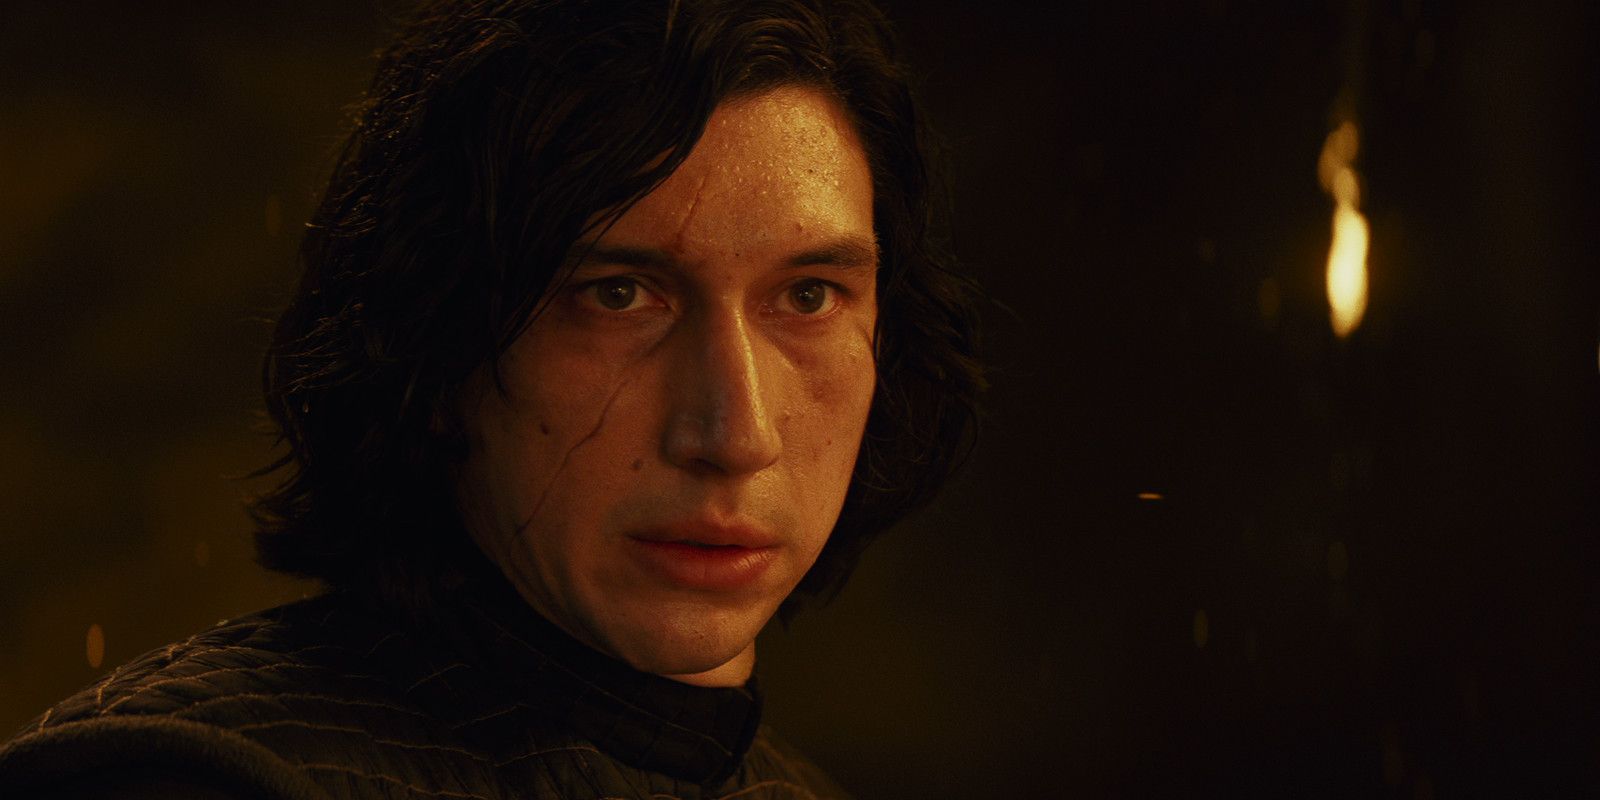 Star Wars: What’s On Kylo Ren’s Face in The Last Jedi Trailer?